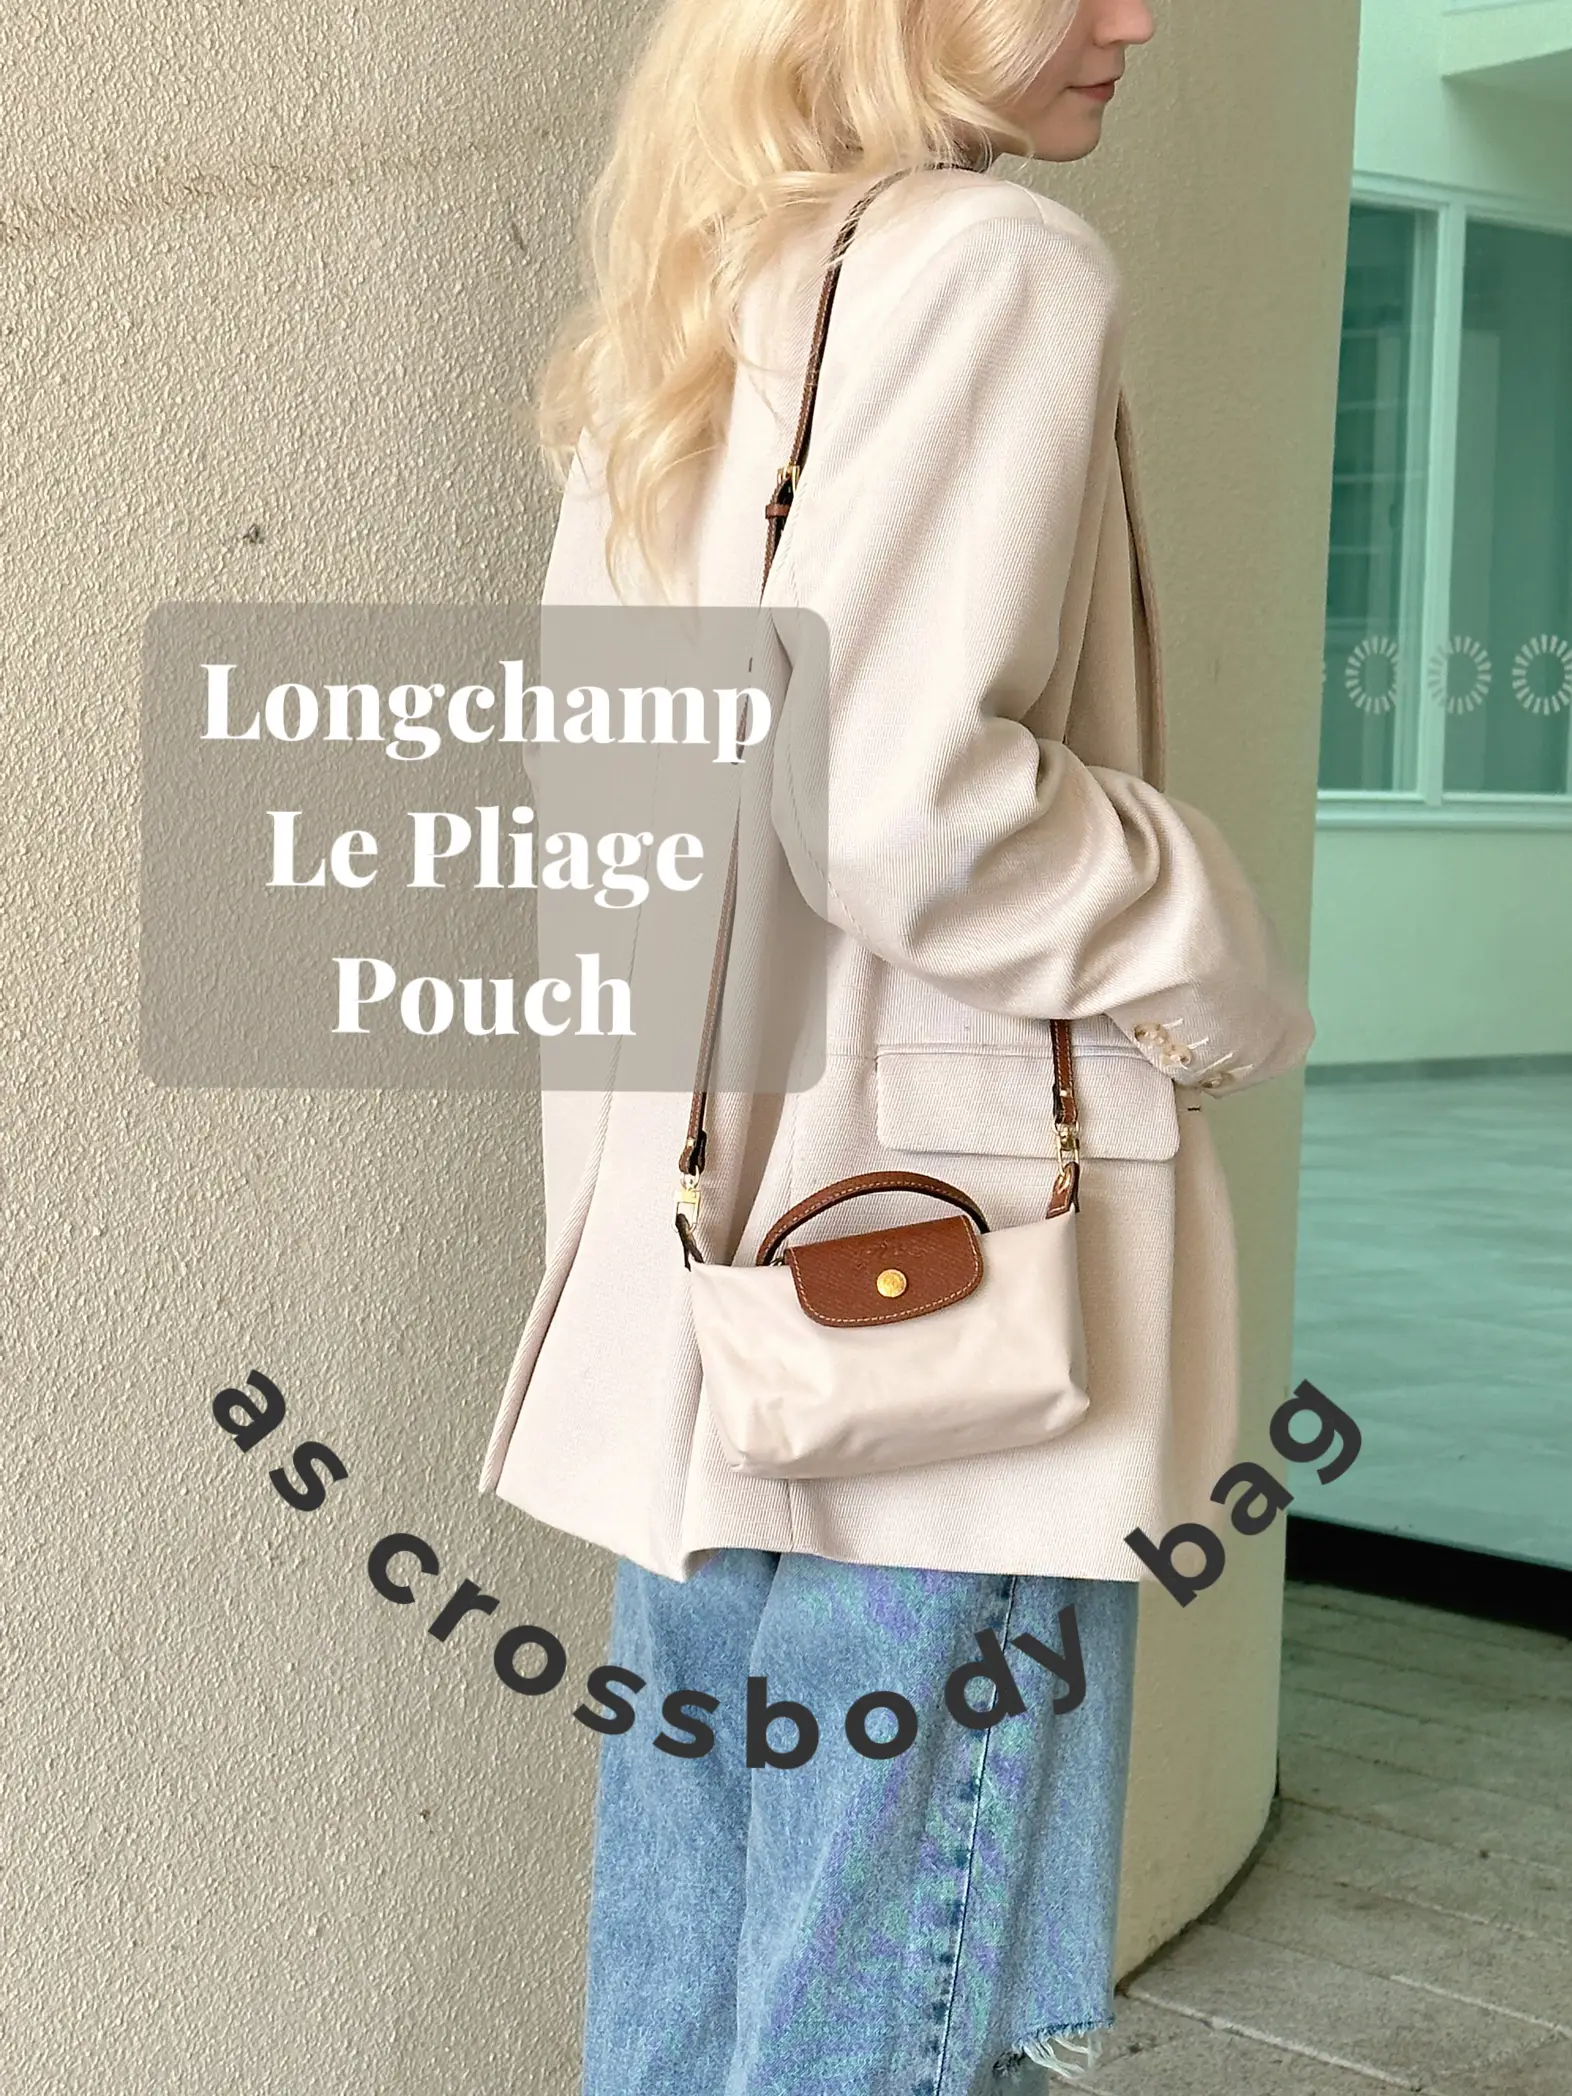 Longchamps Le Pliage Pouch is going viral on TikTok right now